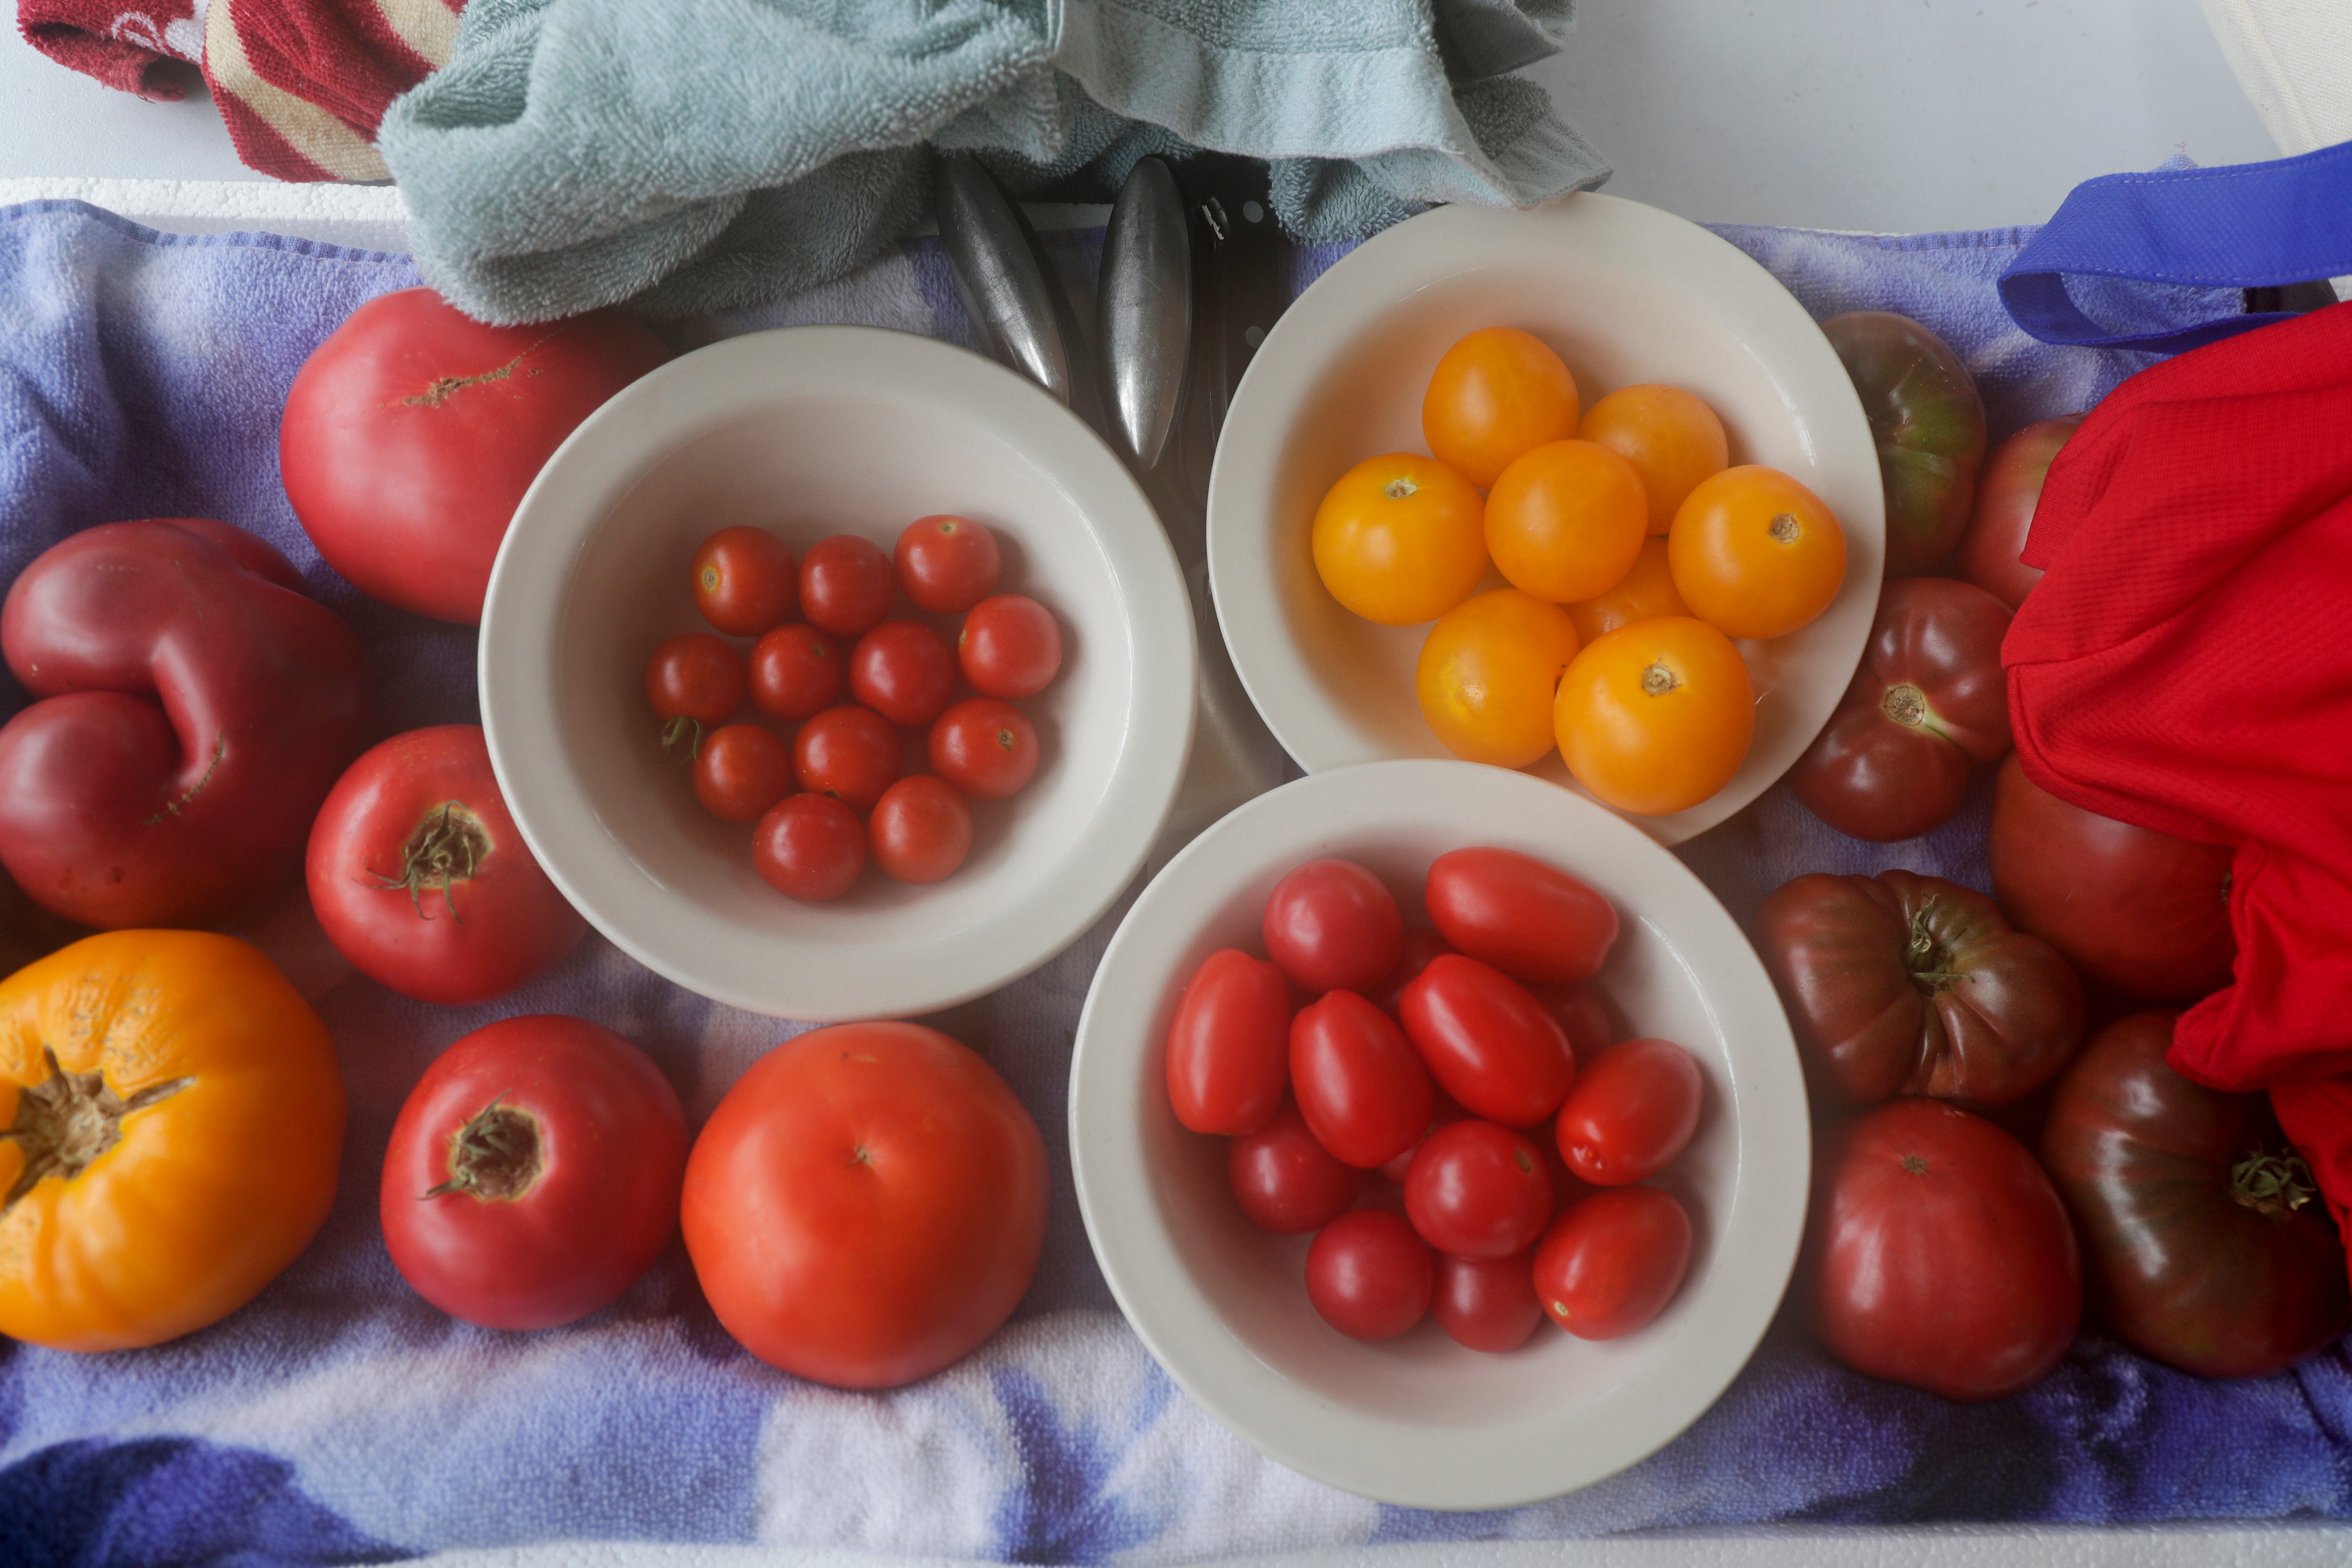 Tallahassee foodies and farmers know there's a lot to love at the Tomato Feastival